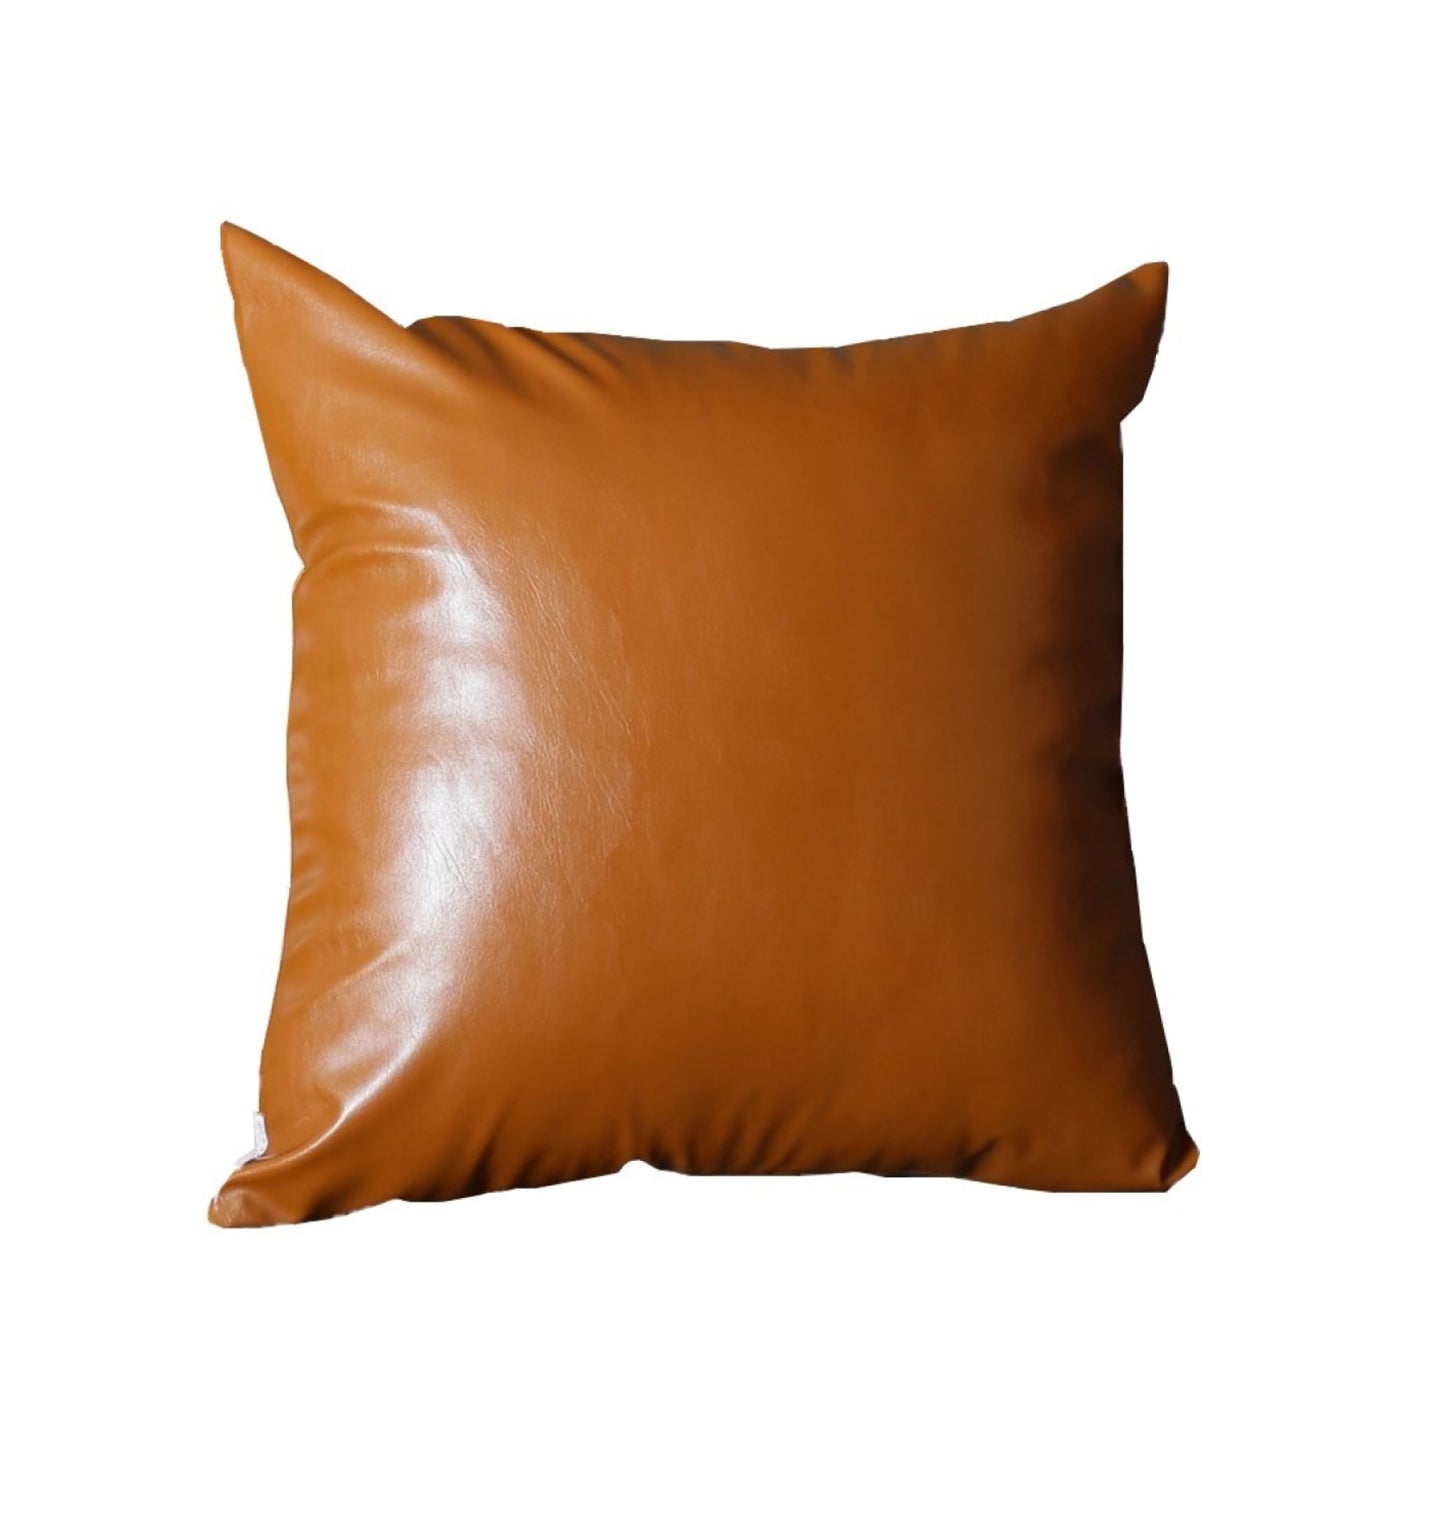 20" X 20" Solid Brown Faux Leather Decorative Pillow Cover